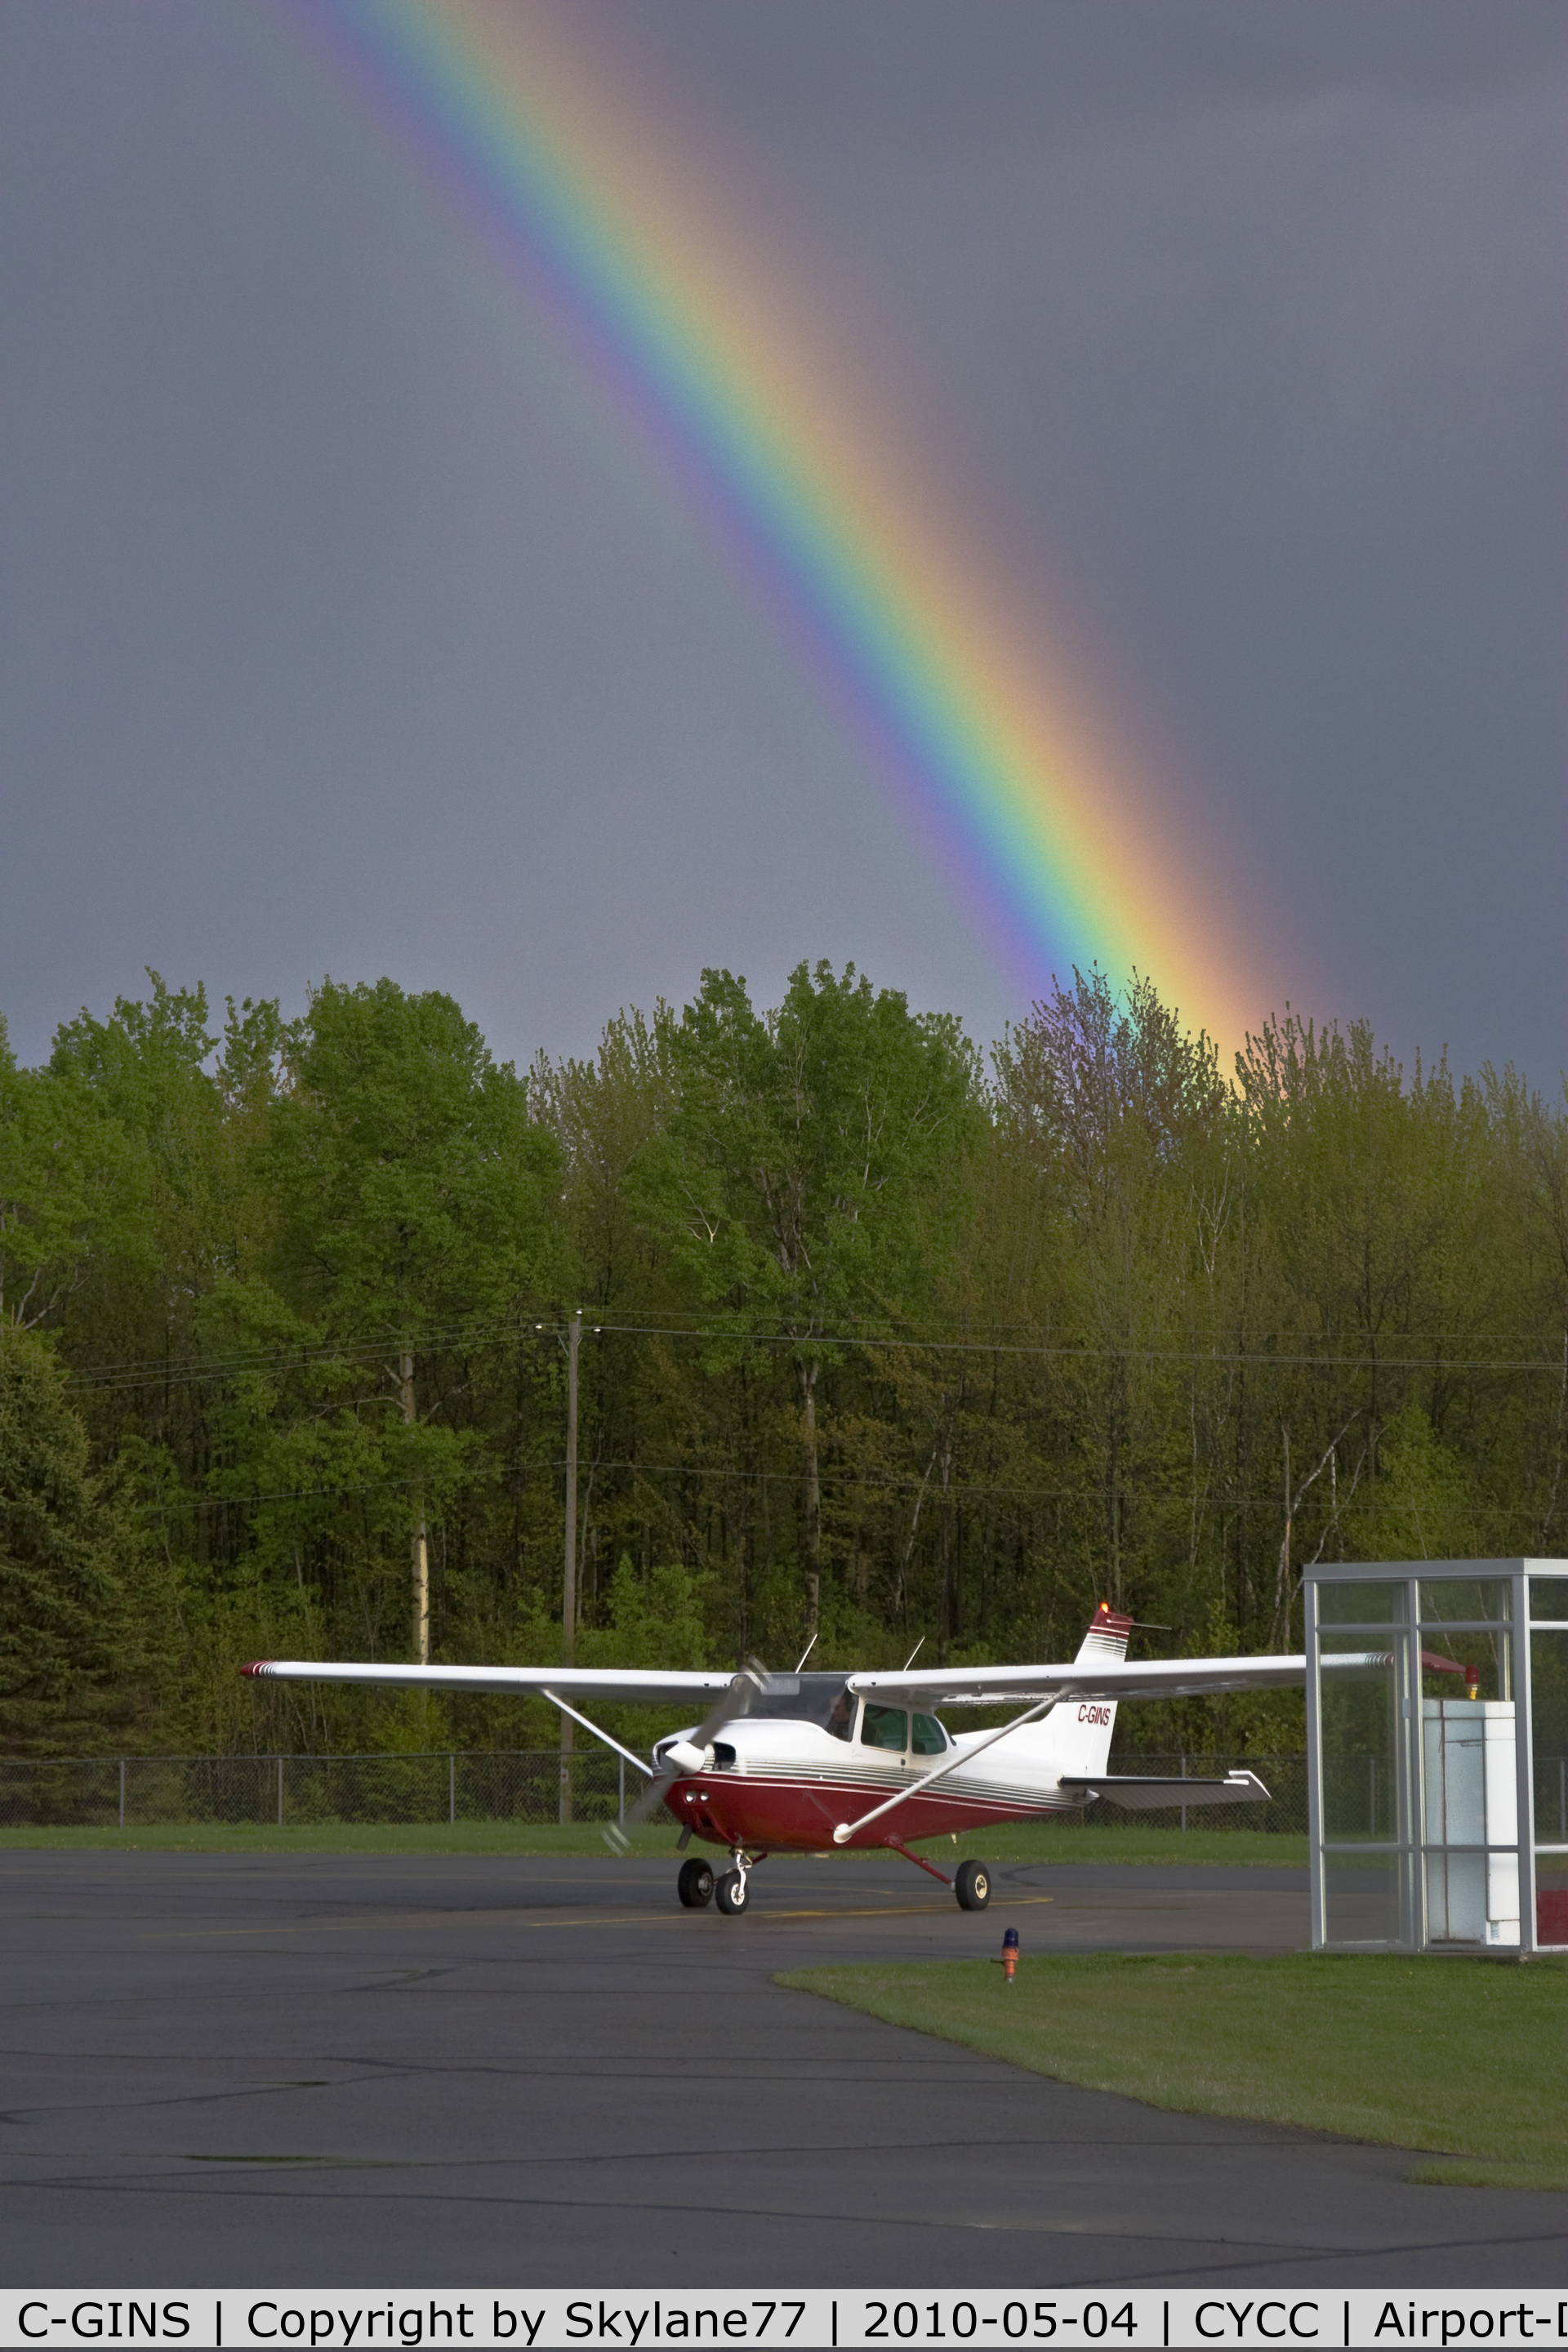 C-GINS, 1980 Cessna 172P C/N 17274449, A dark sky and a rainbow serve as a beautiful backdrop for C-GINS as it readies to depart into clear skies to the west.